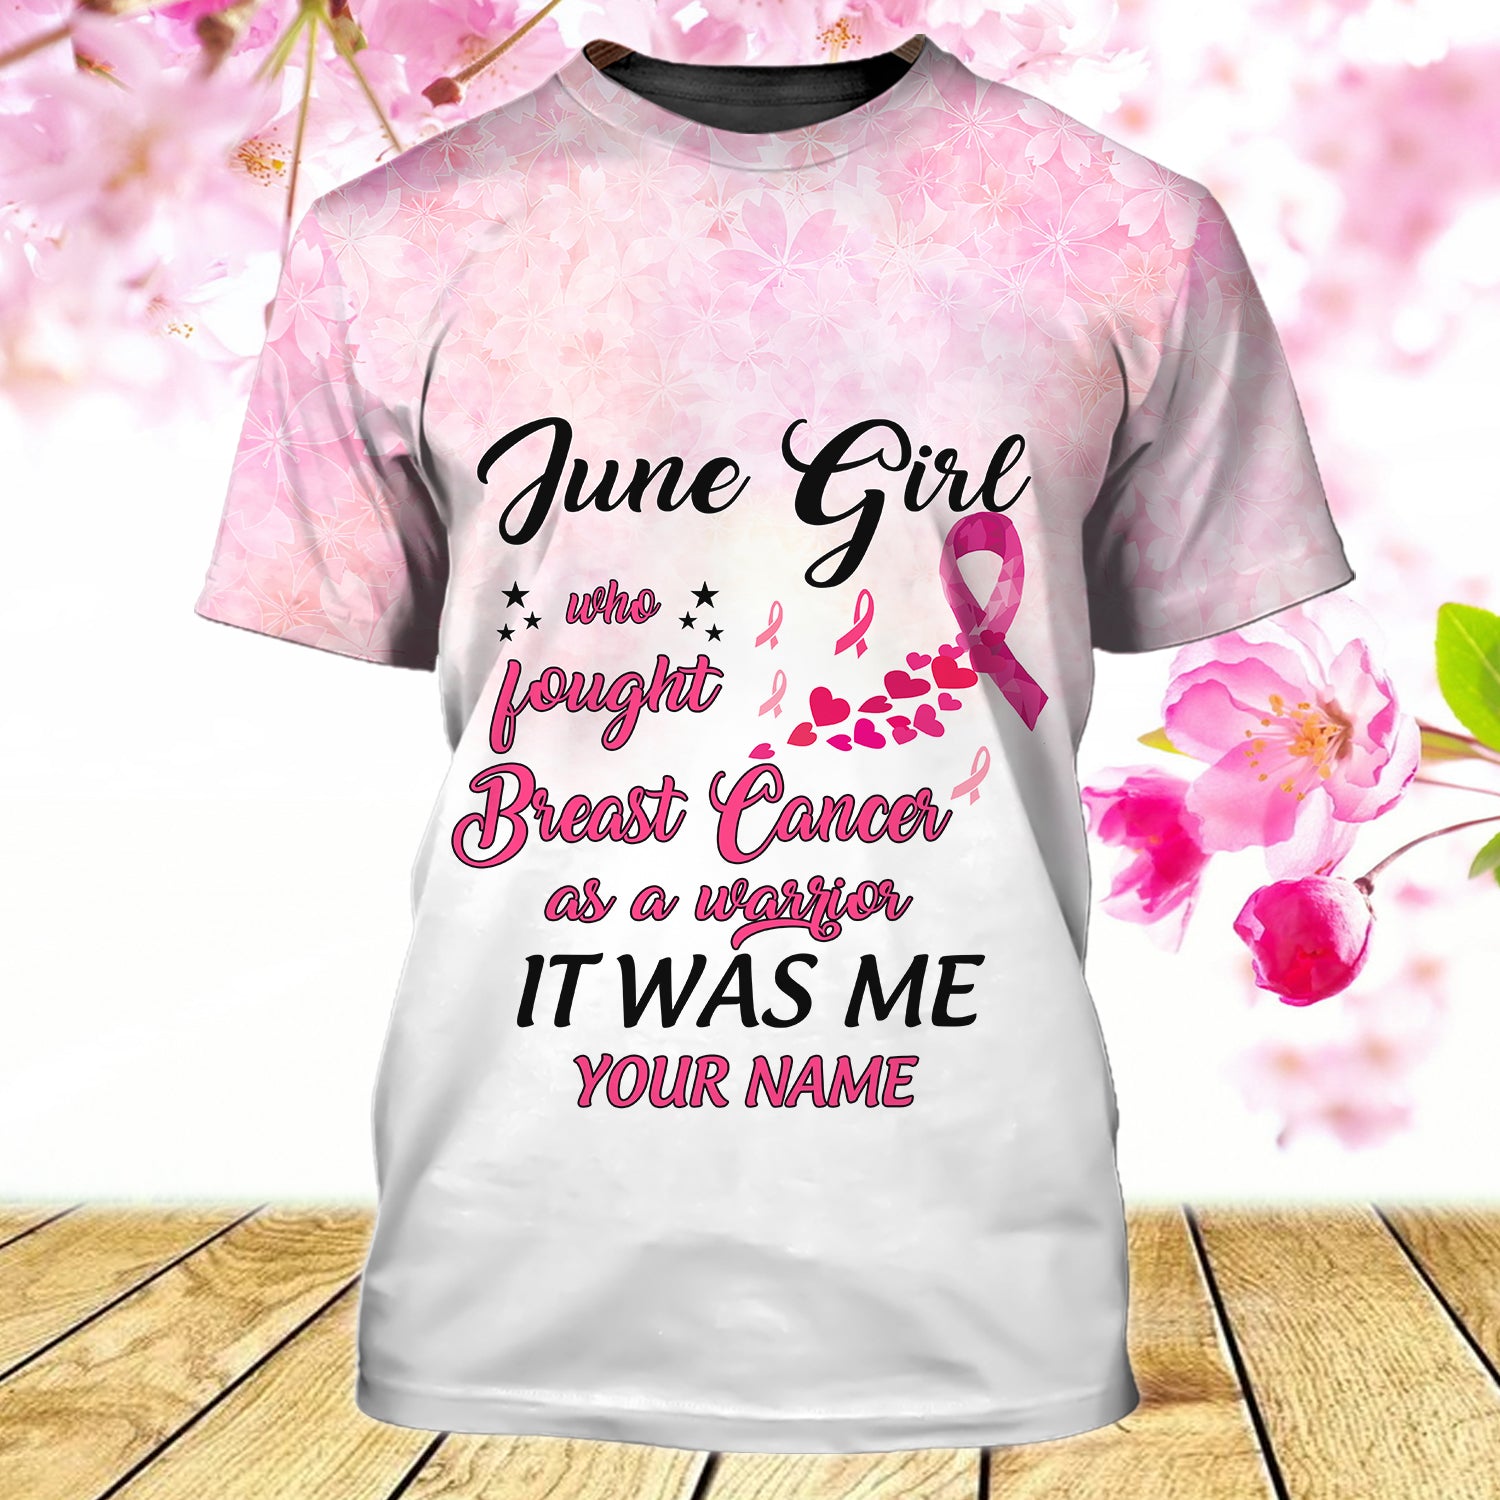 June Girl fought Breast Cancer as a Warrior - Personalized Name 3D Tshirt - Nmd 29